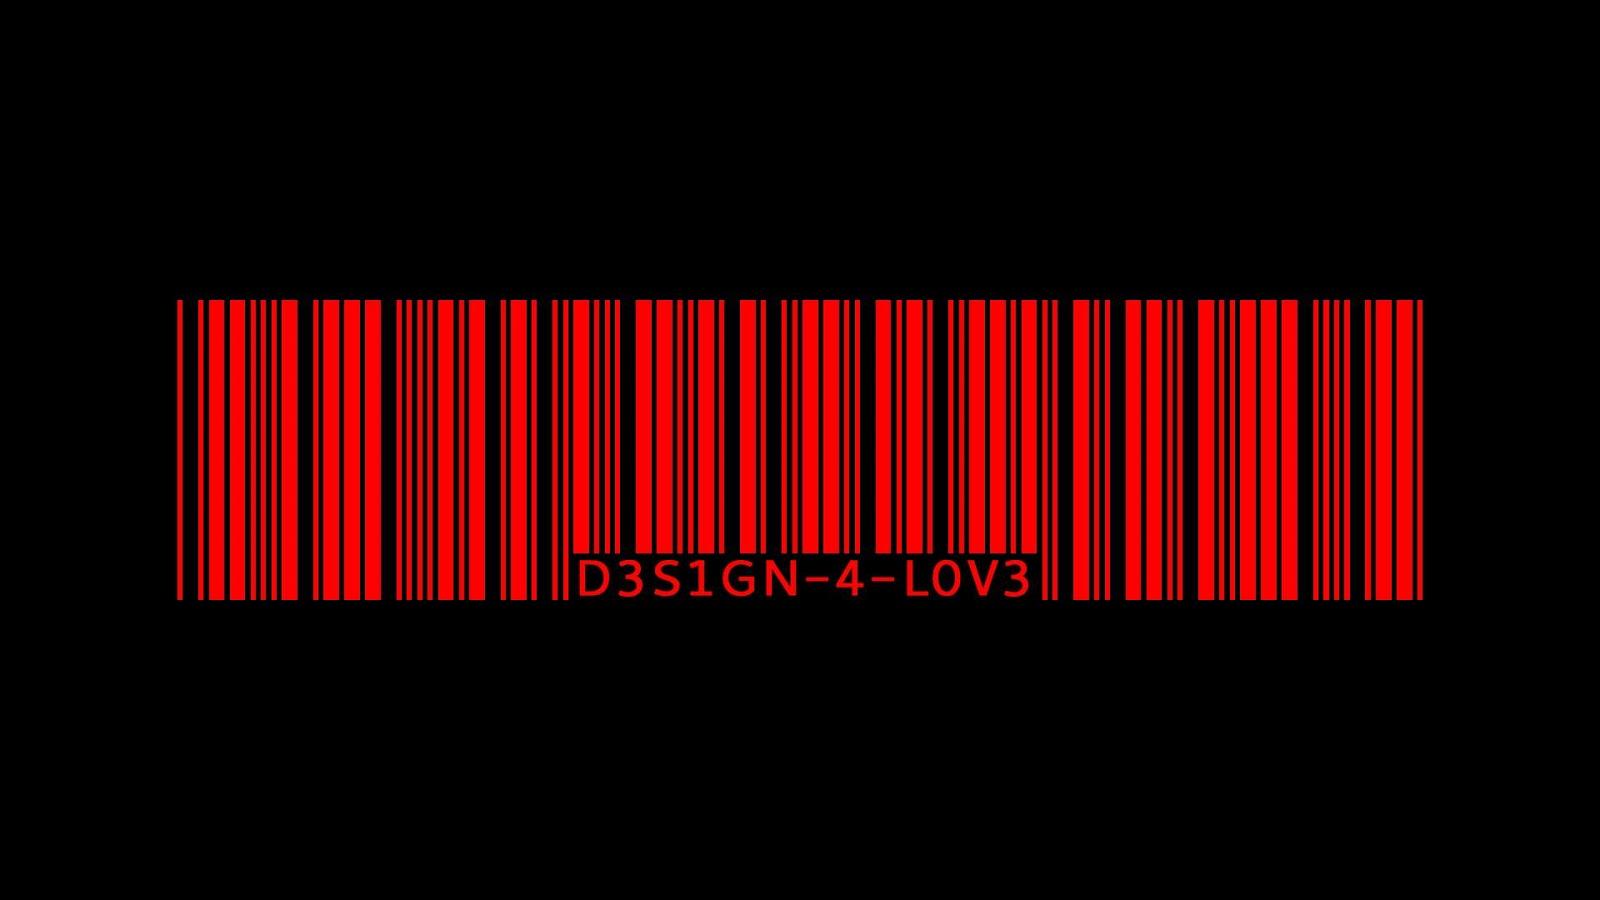 Black And White Wallpaper: Red Barcode Black Red Wallpaper